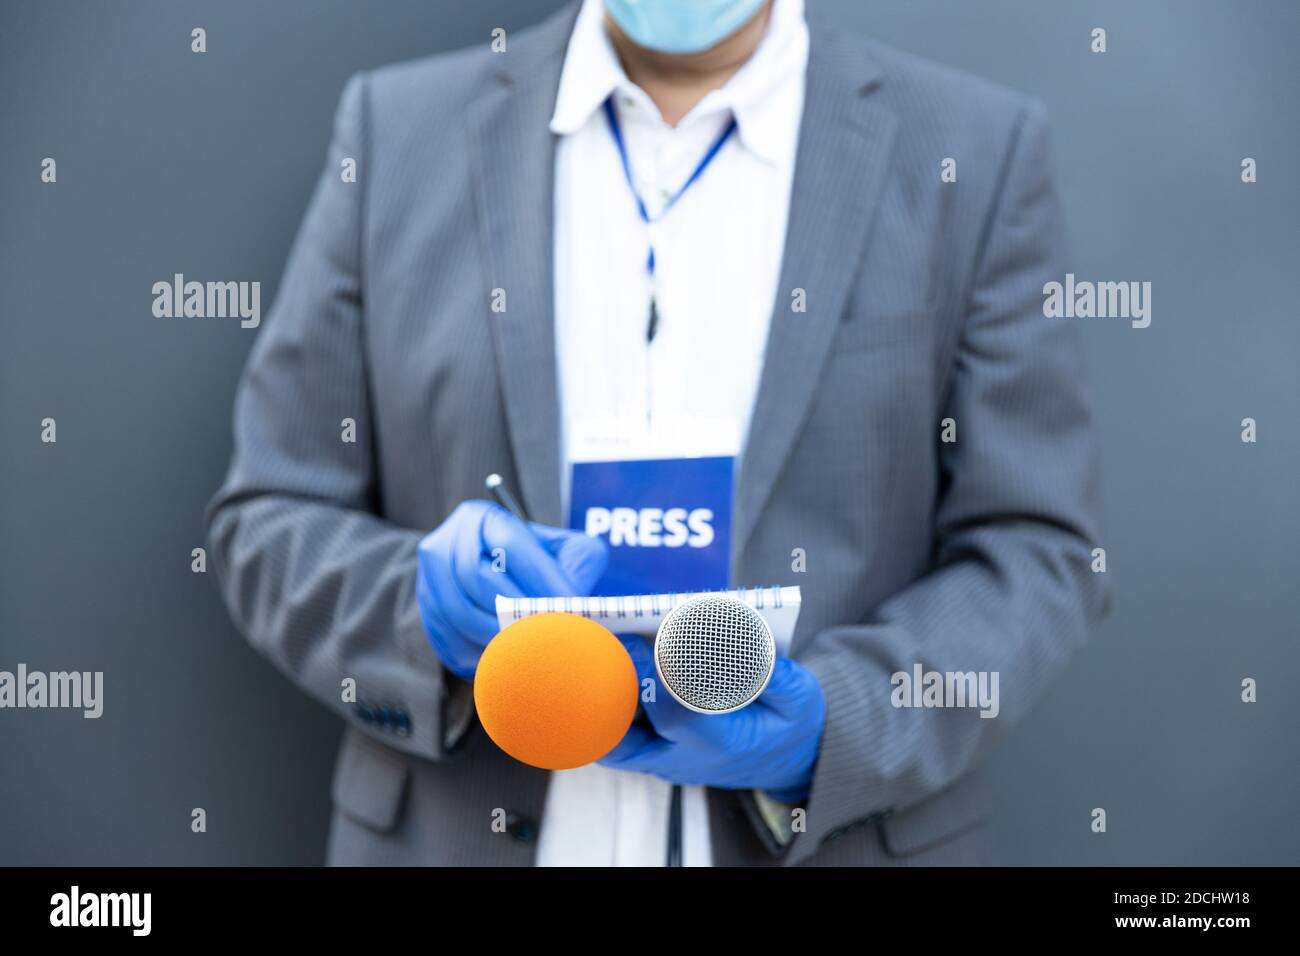 Journalist at news conference or media event wearing protective gloves and face mask against coronavirus COVID-19 disease holding microphone writing n Stock Photo